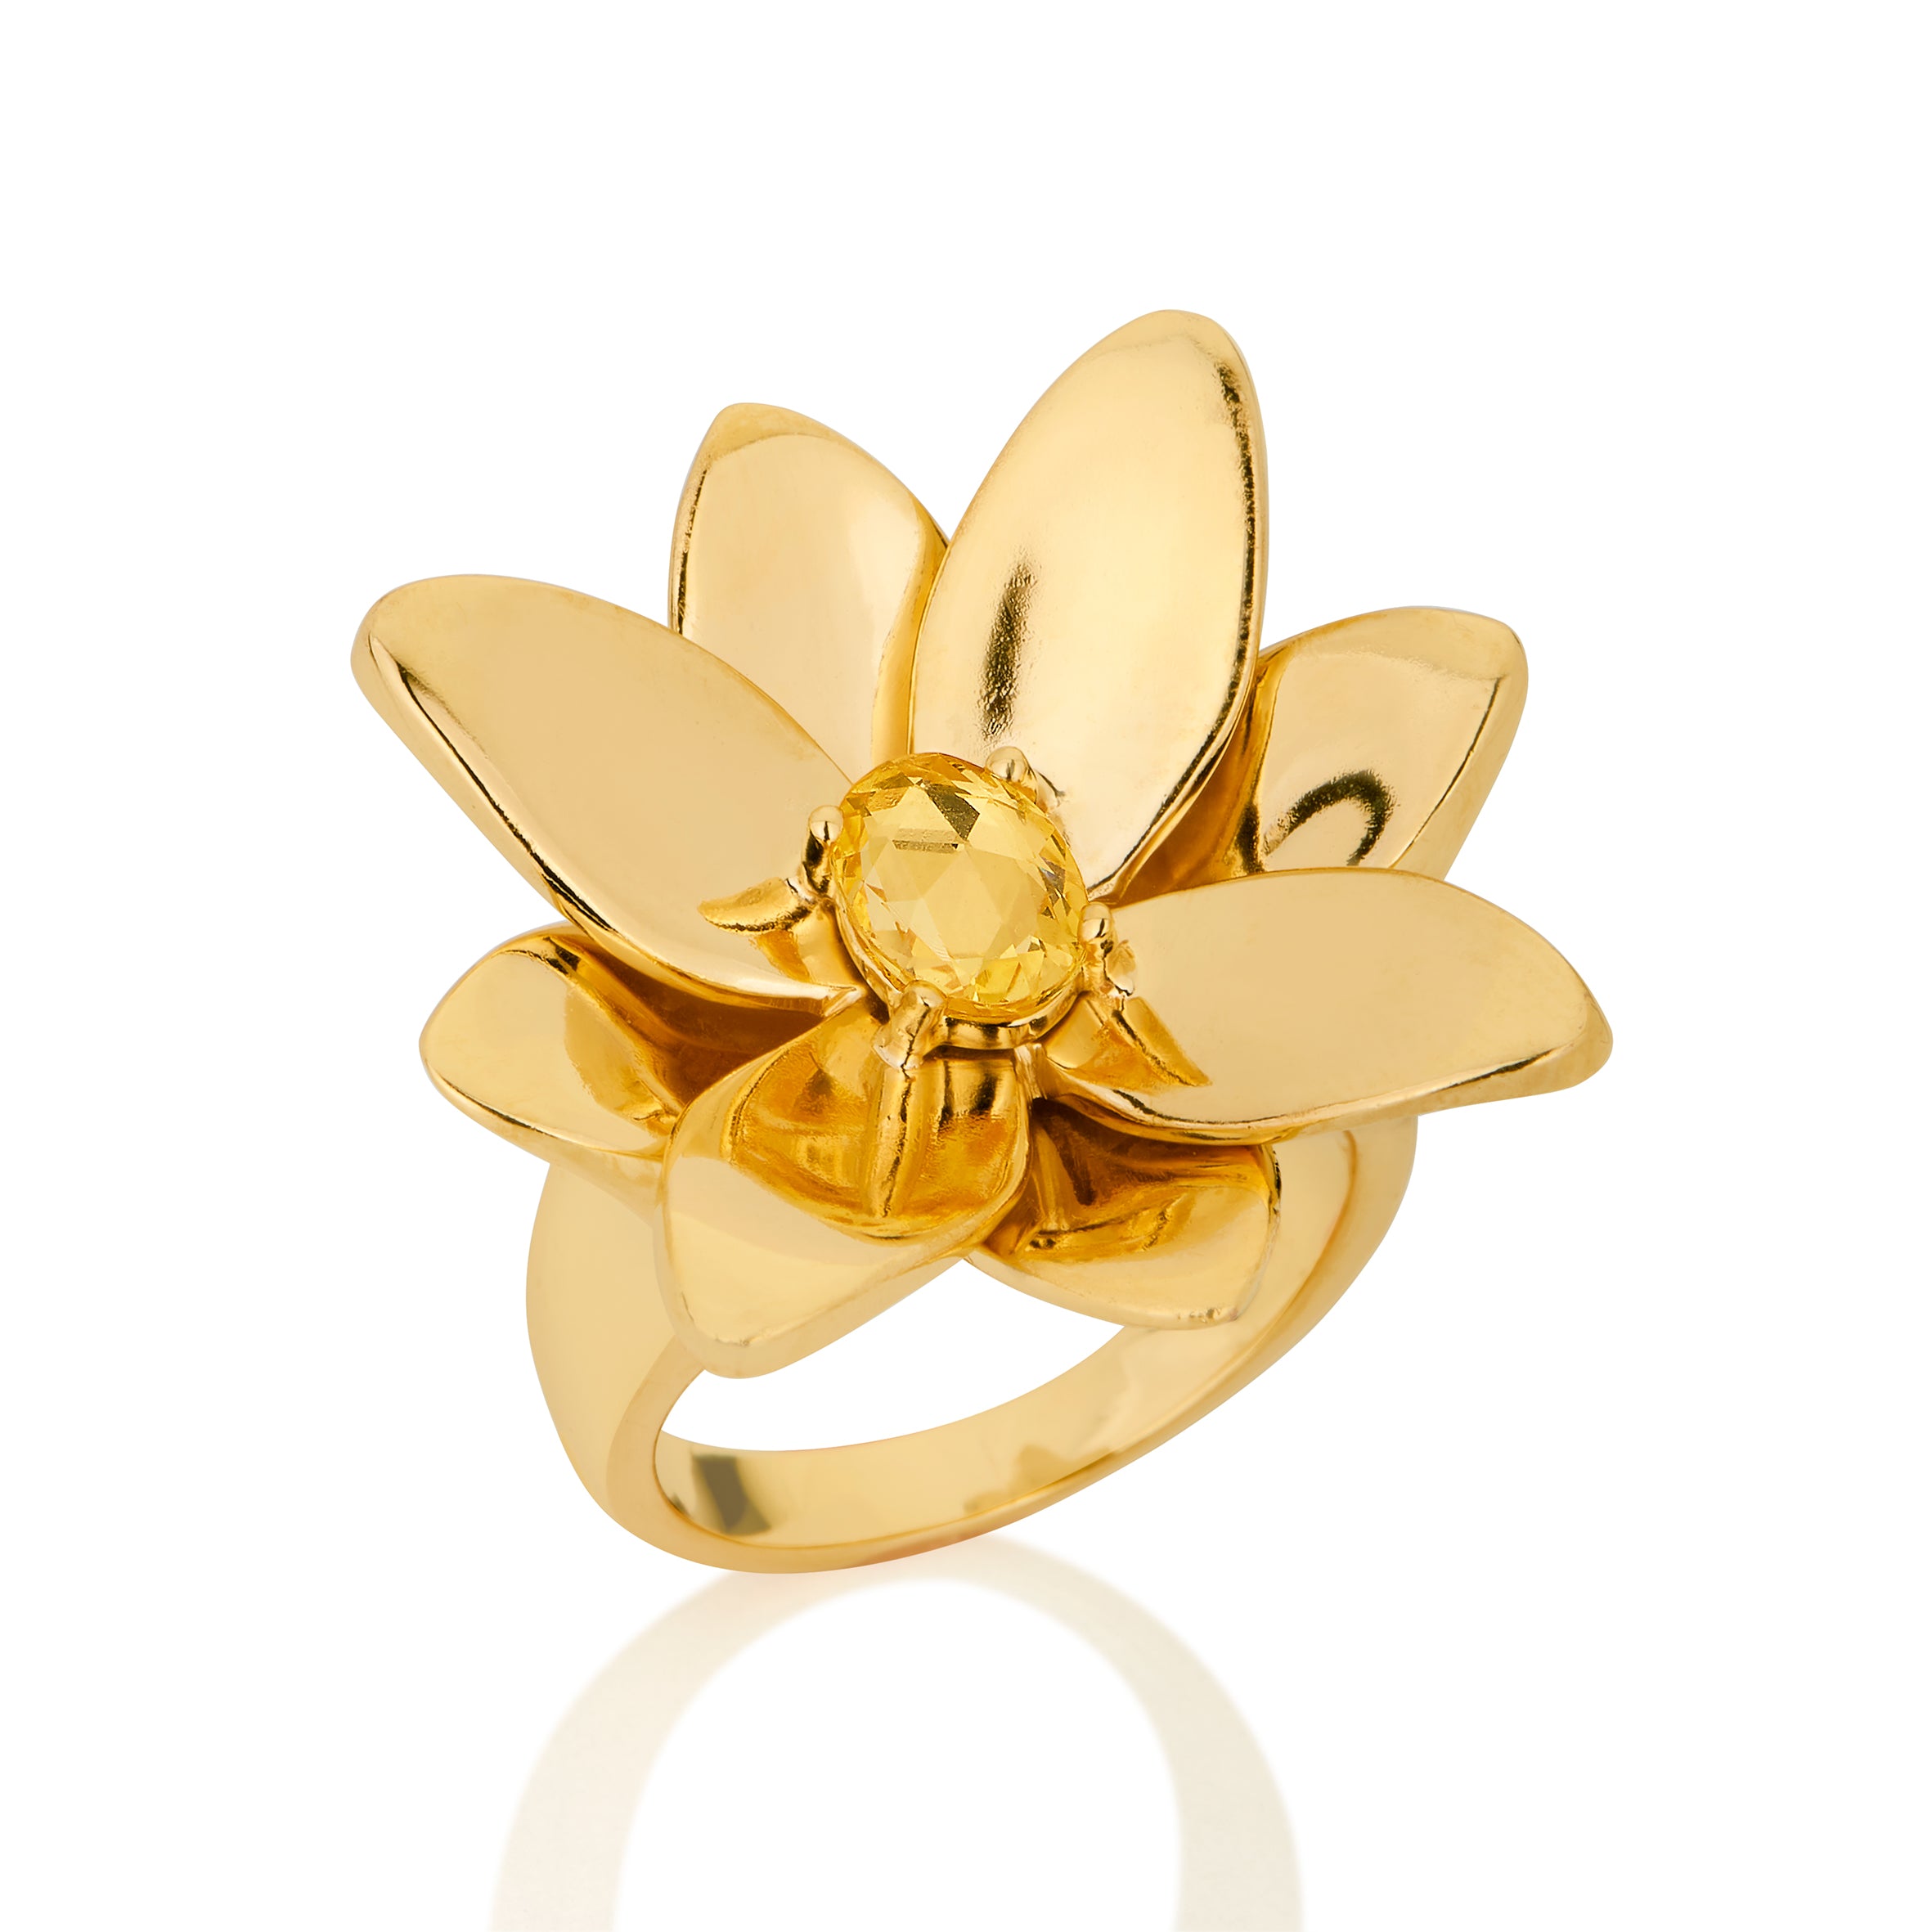 BLOSSOM RING IN 18K YELLOW GOLD PLATED SILVER WITH SAPPHIRE